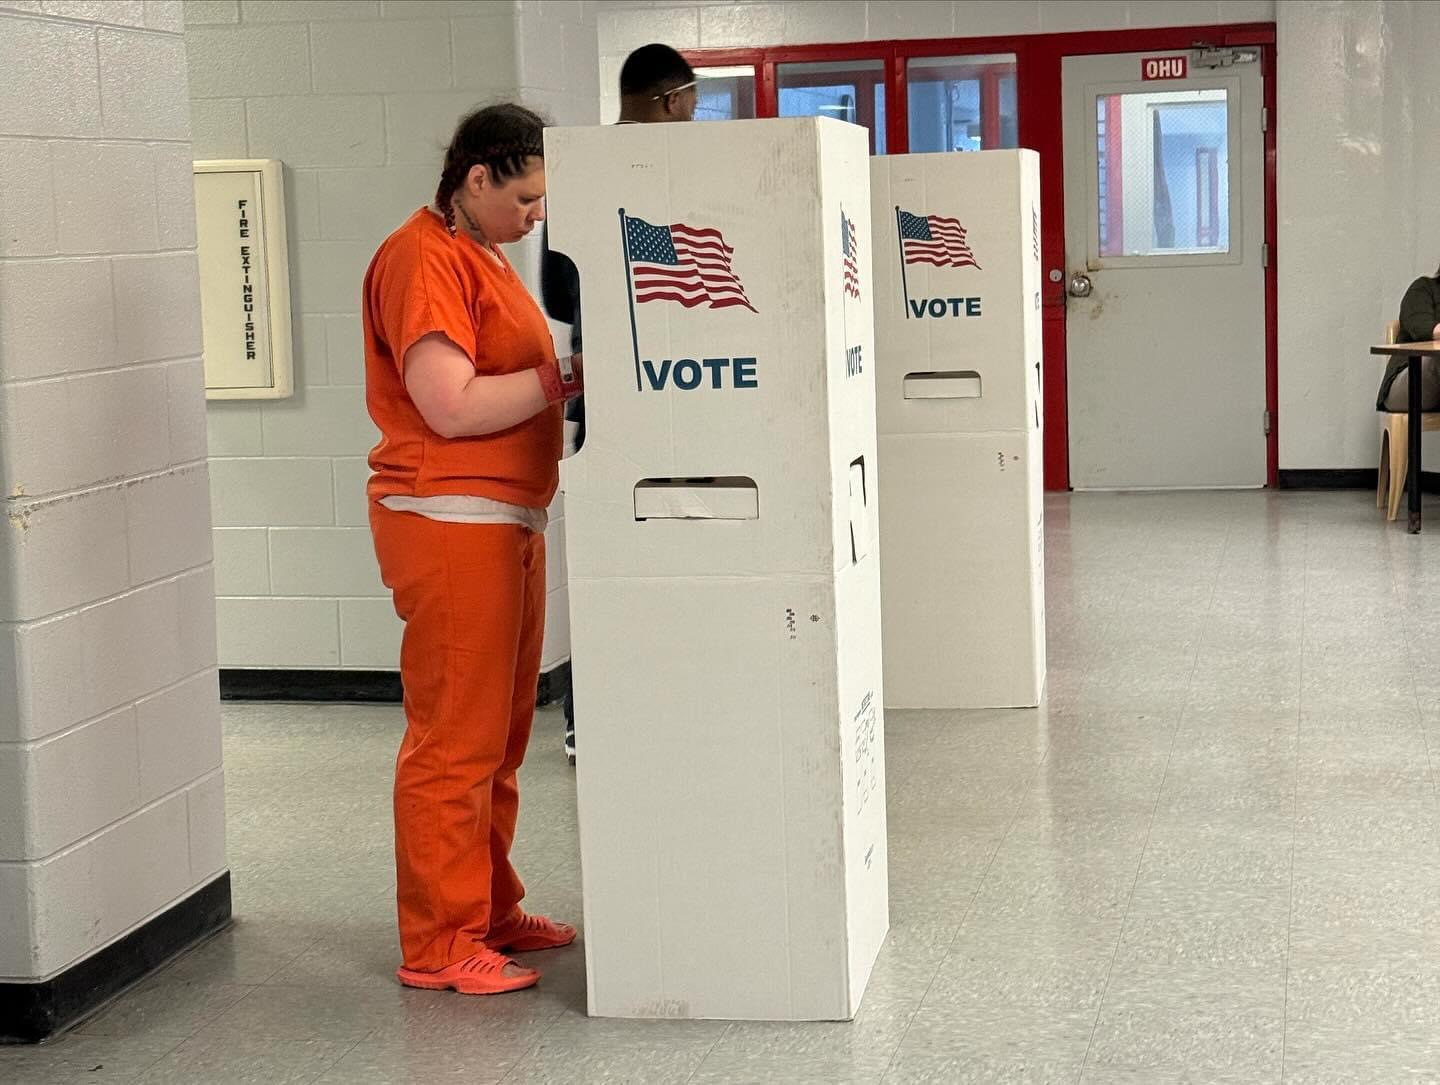 California Looking to Allow Prison Voting